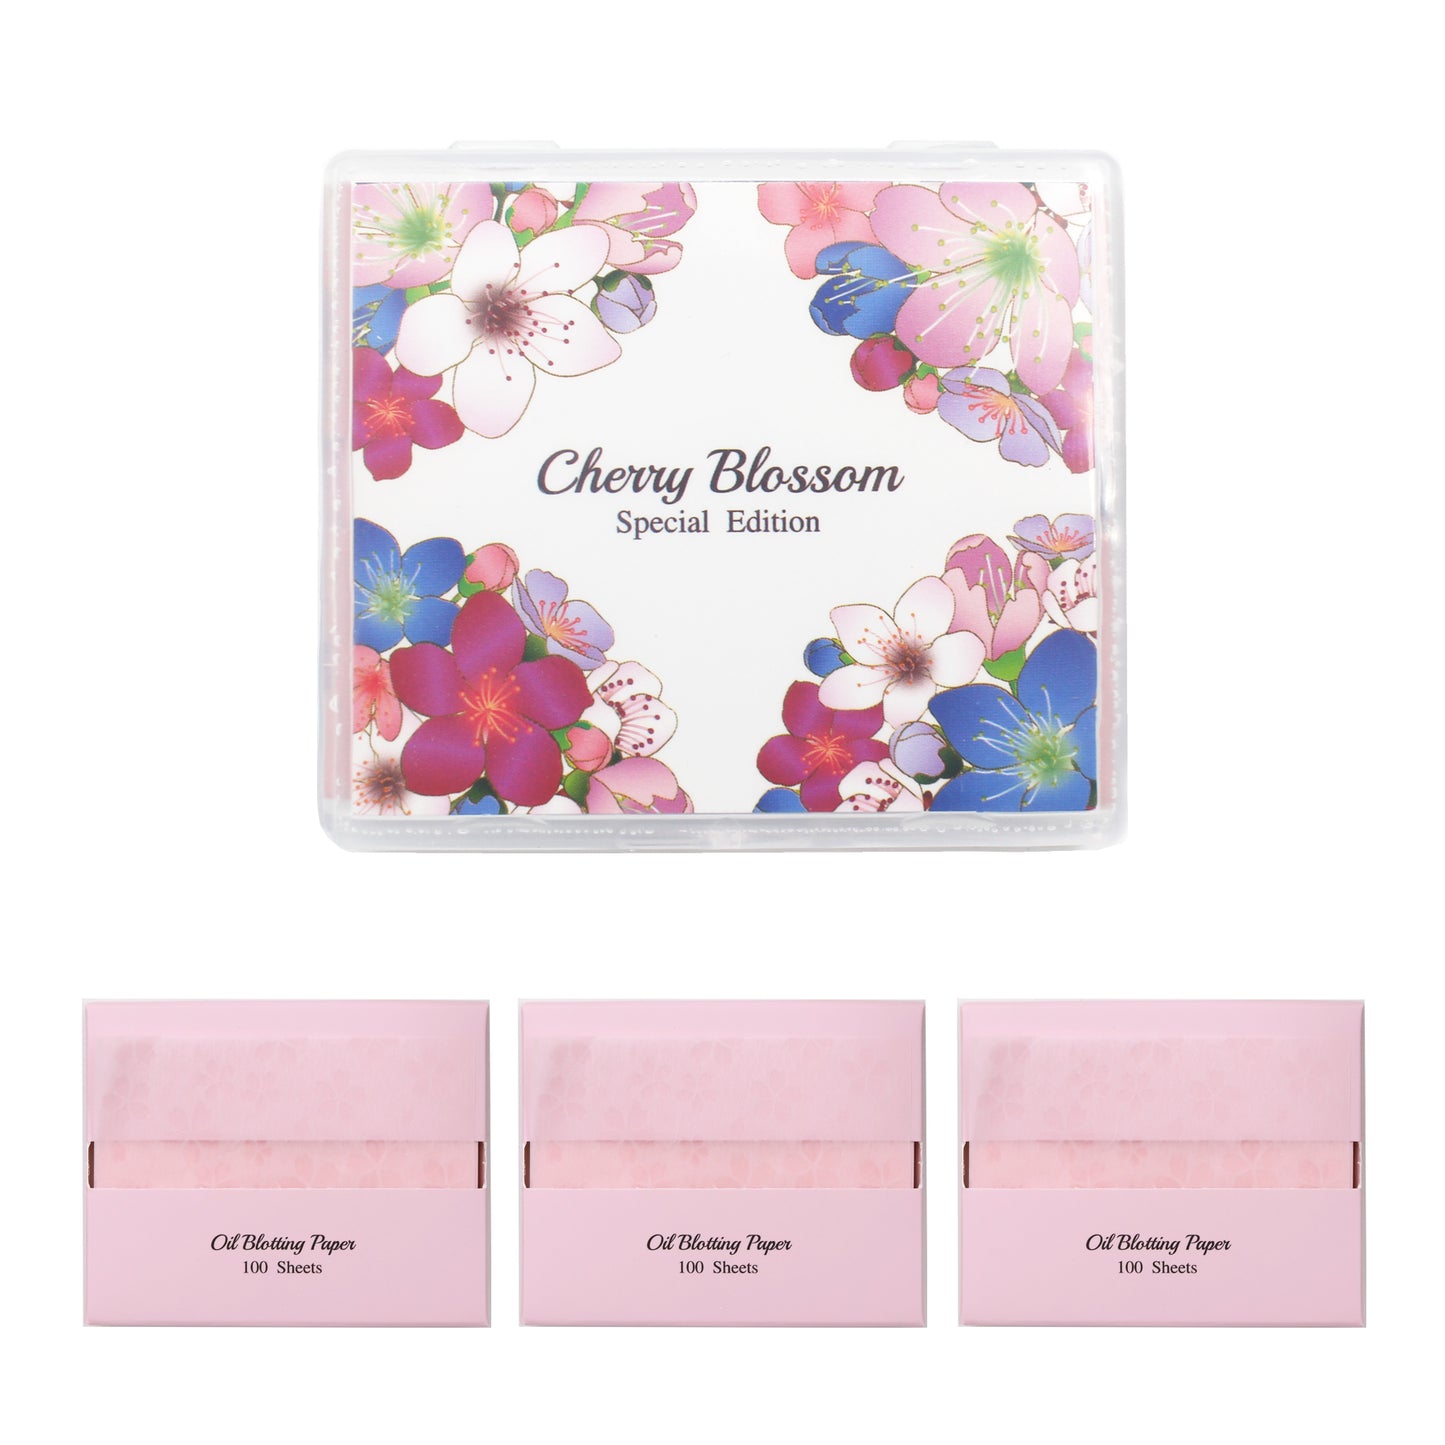 Natural Hemp Face Oil Blotting Paper with Mirror Case and Refills - Cherry Blossom